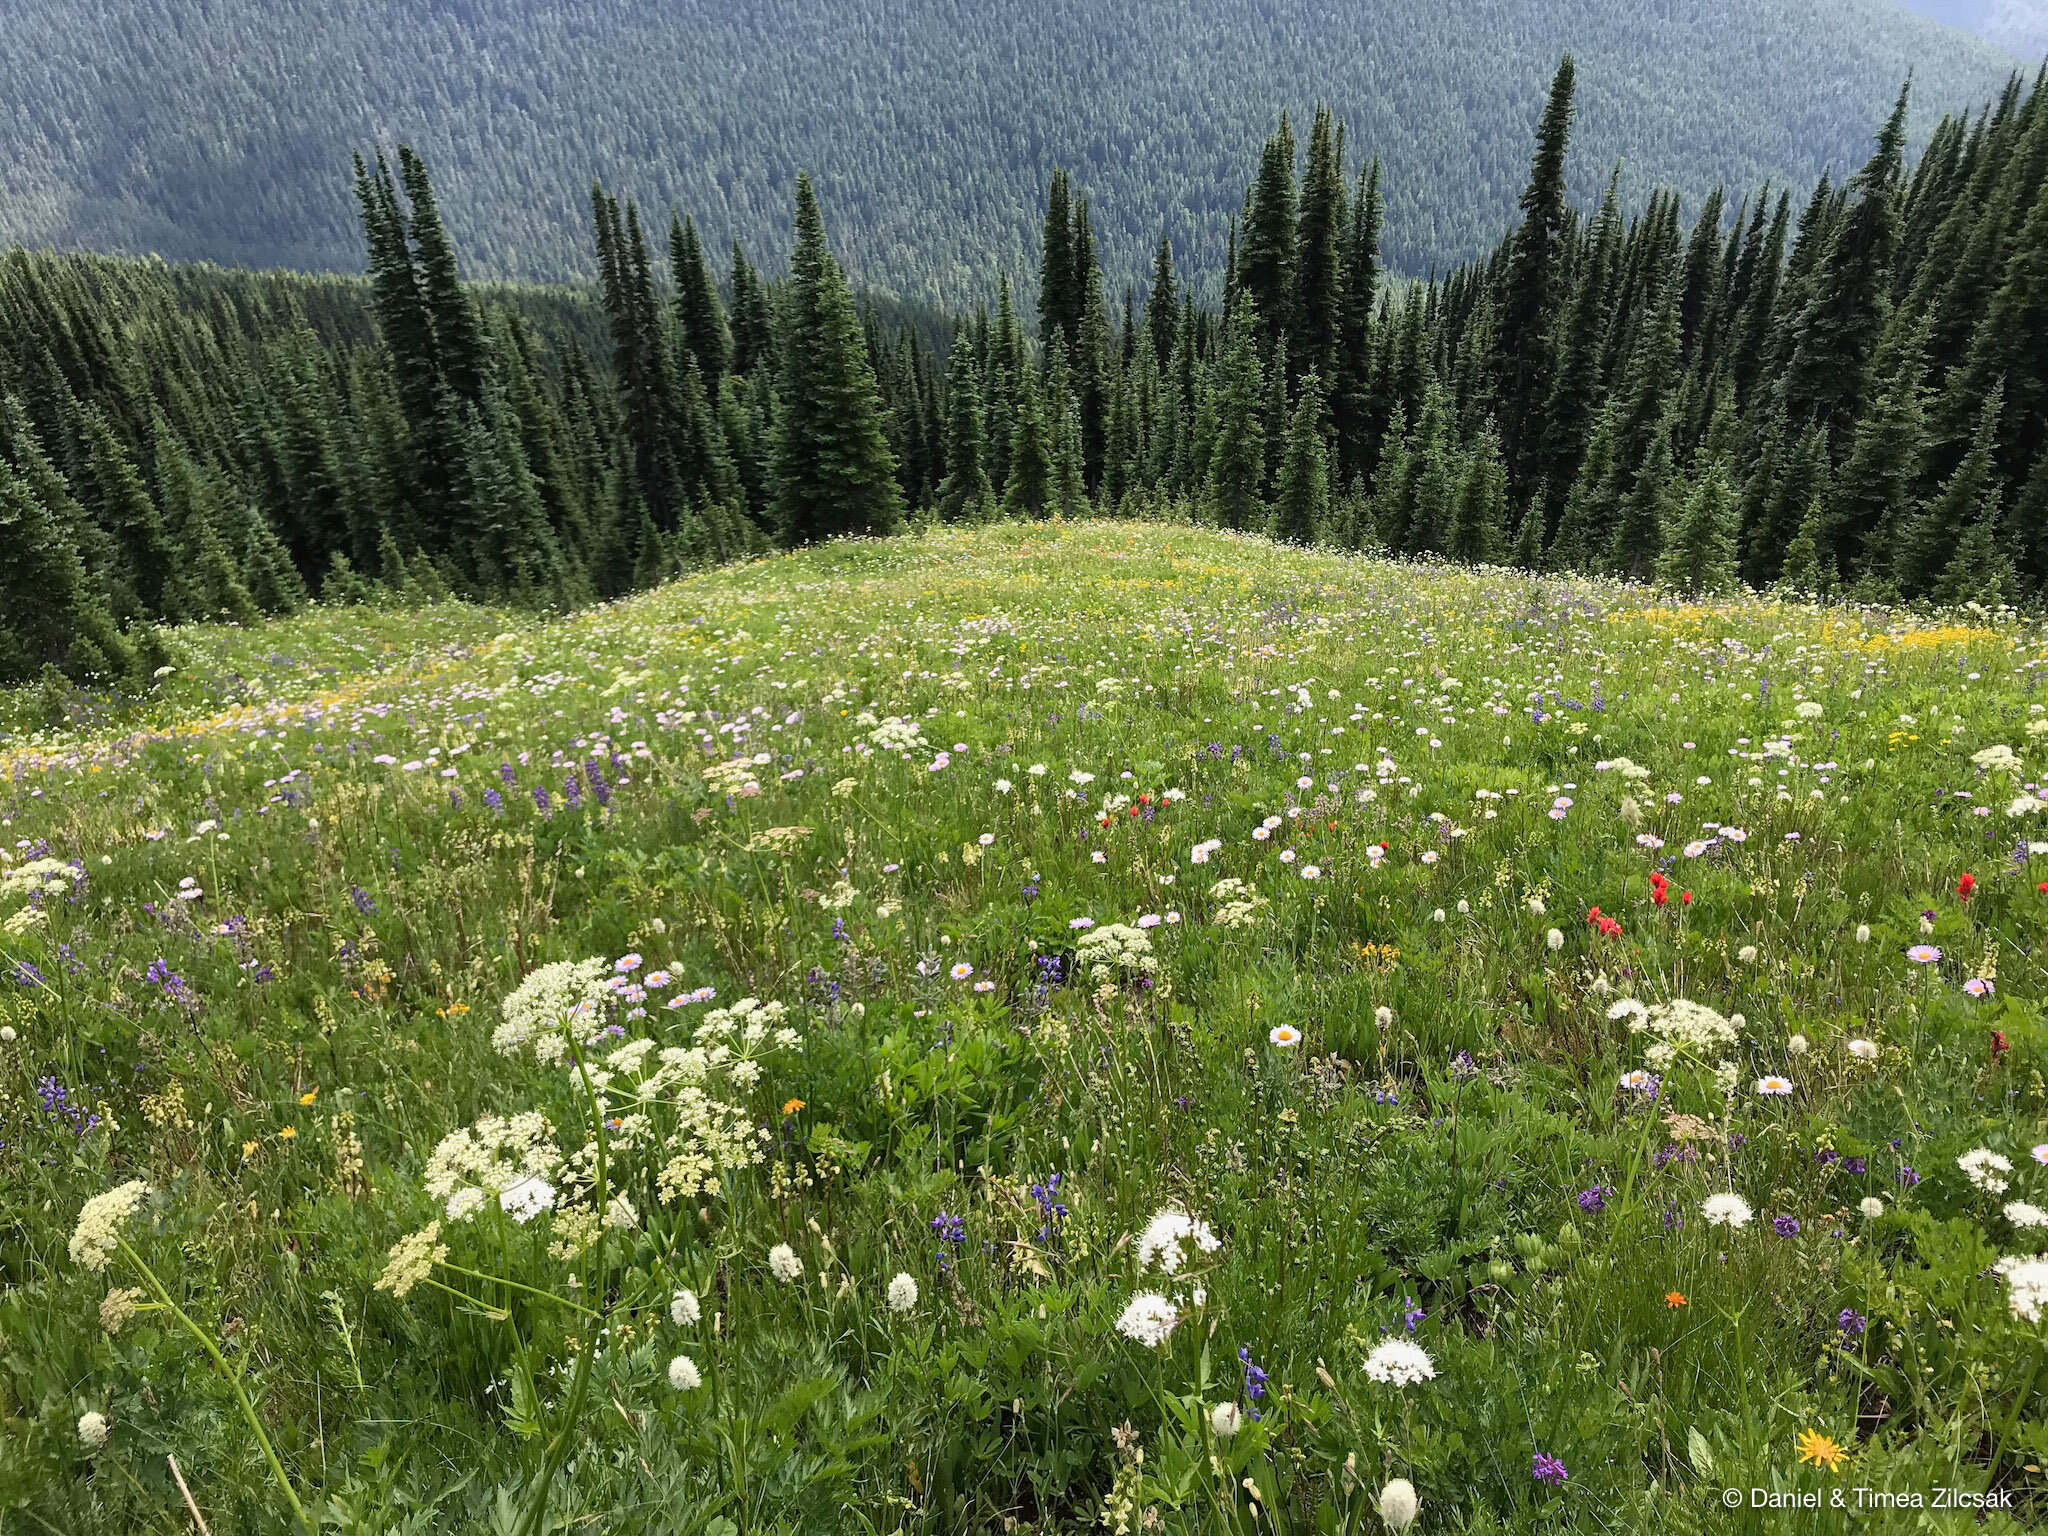 Mountain flowers in the meadows from Lady Camp to Image Lake, Glacier Peak Wilderness